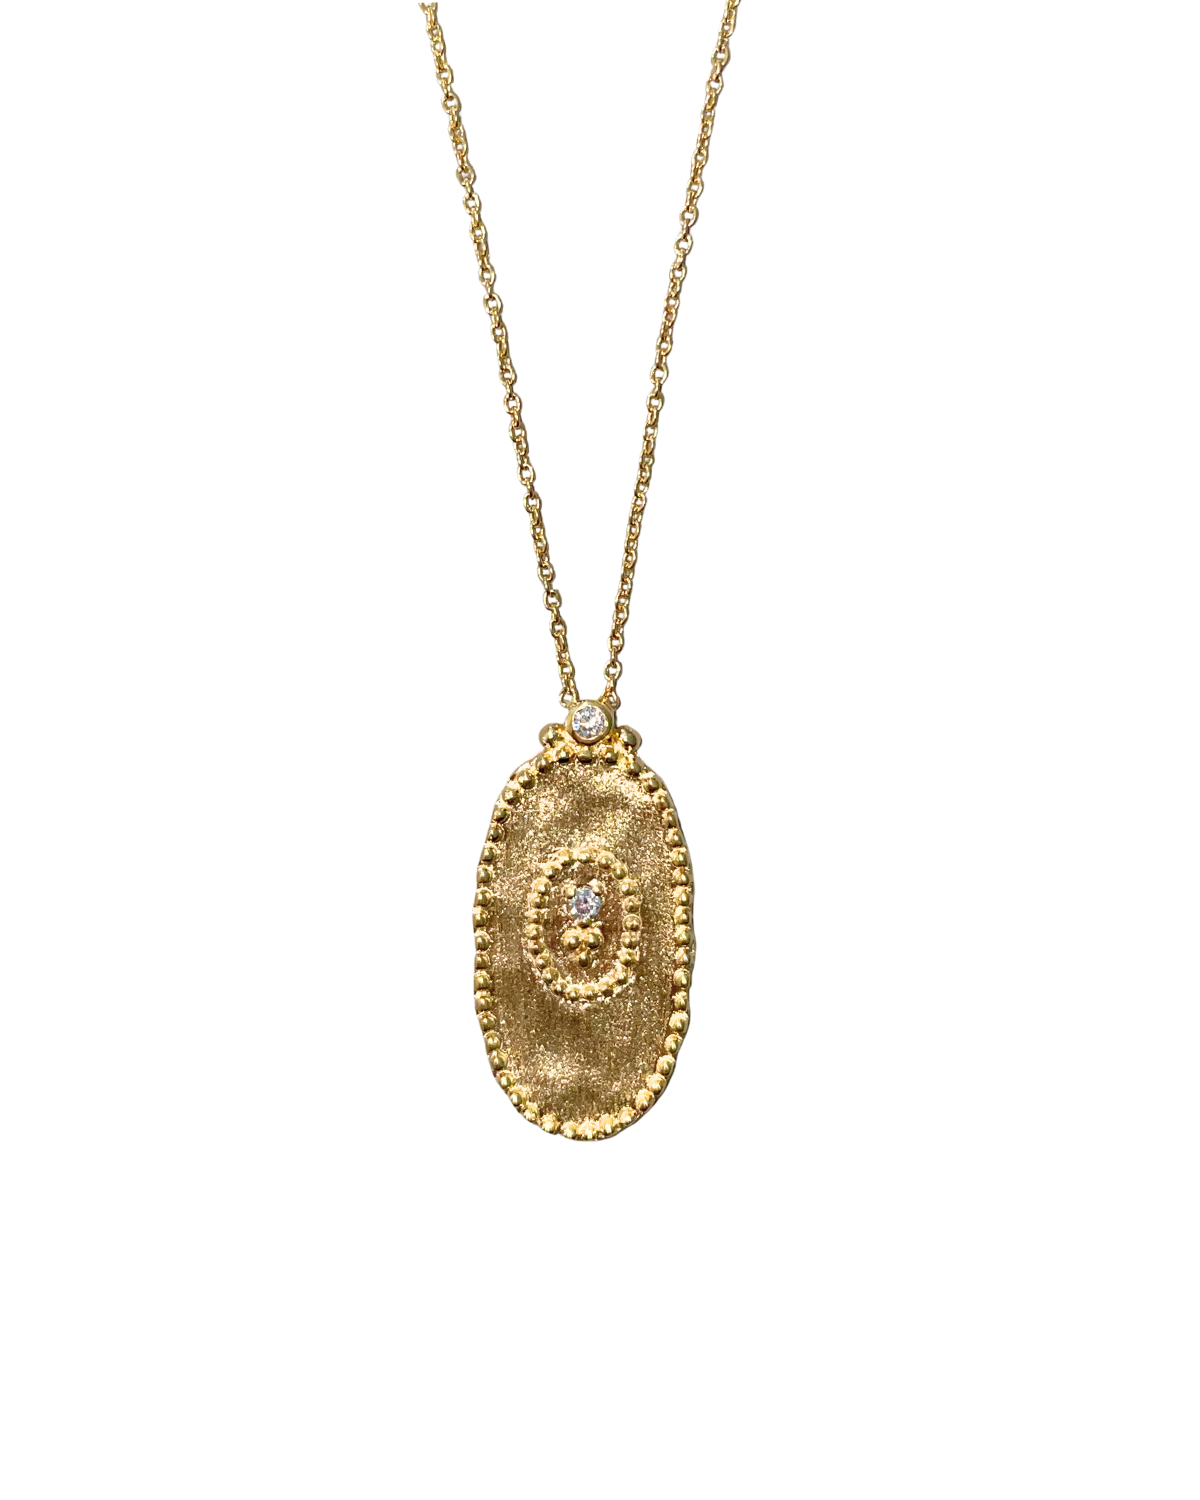 Paola Necklace (Gold)